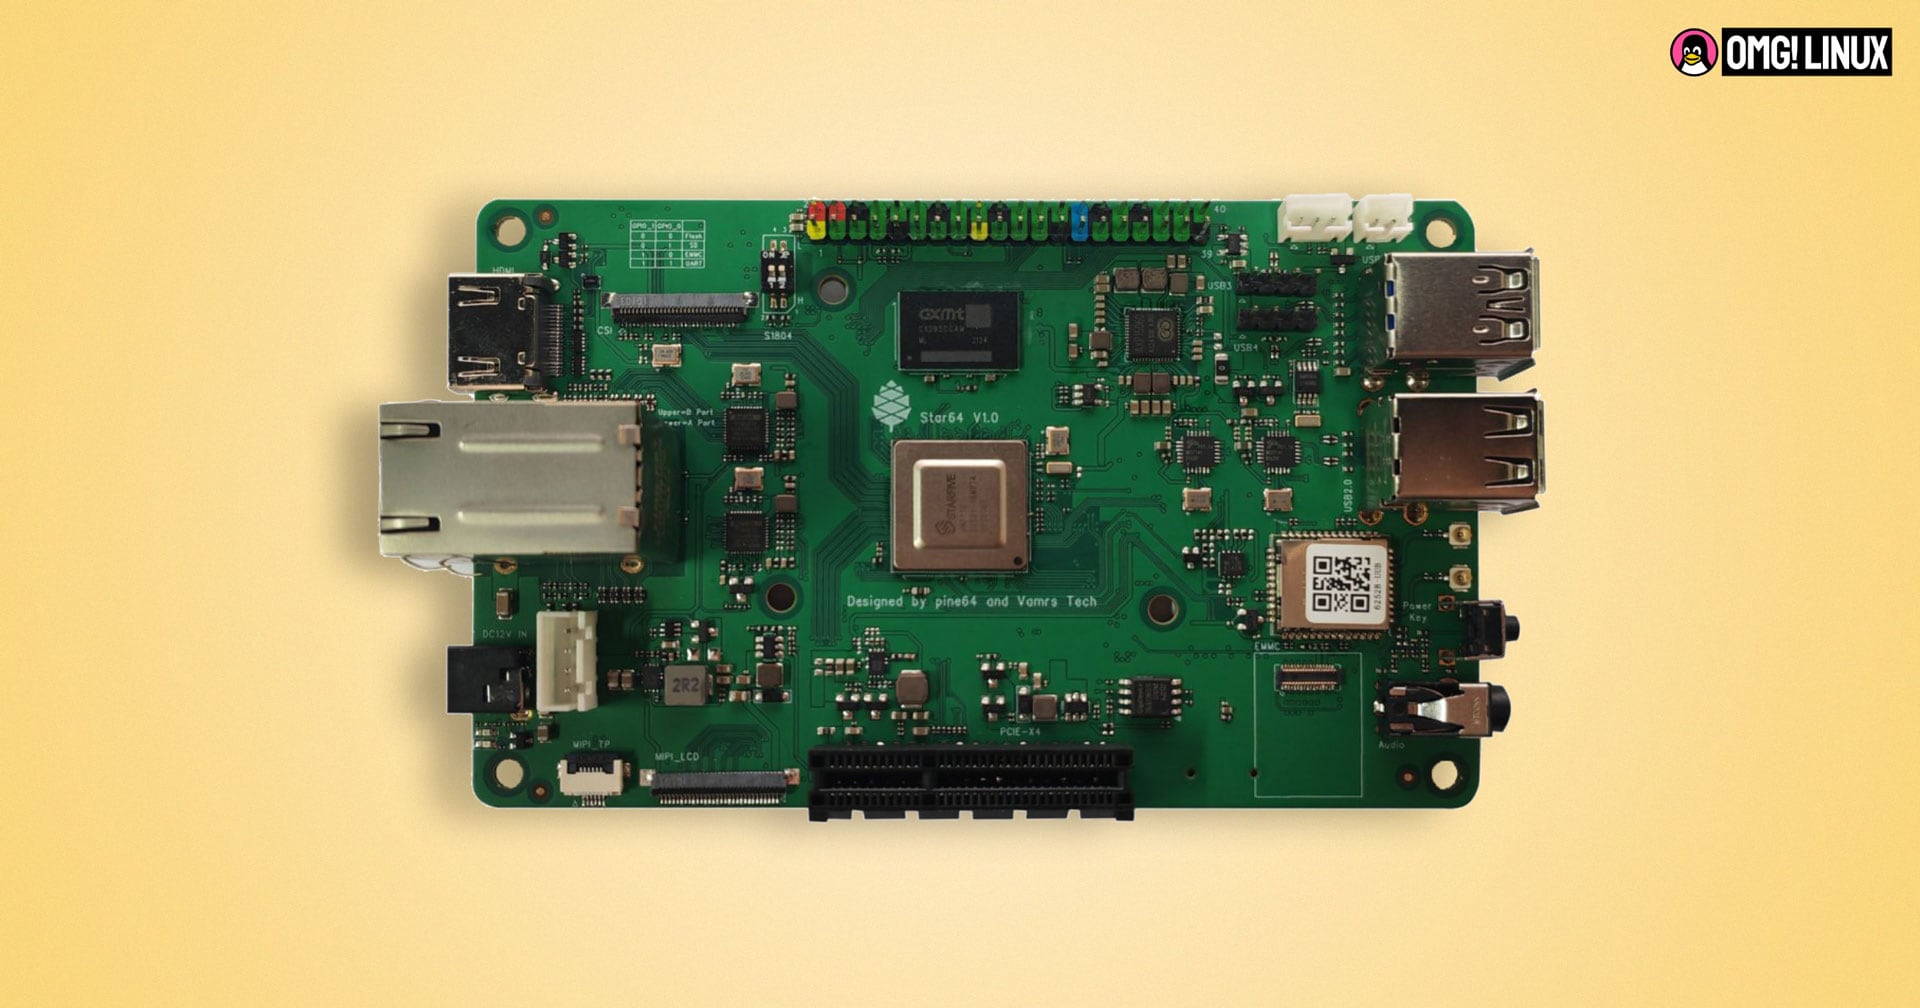 The company, famous for offering an array of open-source friendly hardware at low cost, is launching a new single-board computer powered by a quad-cor